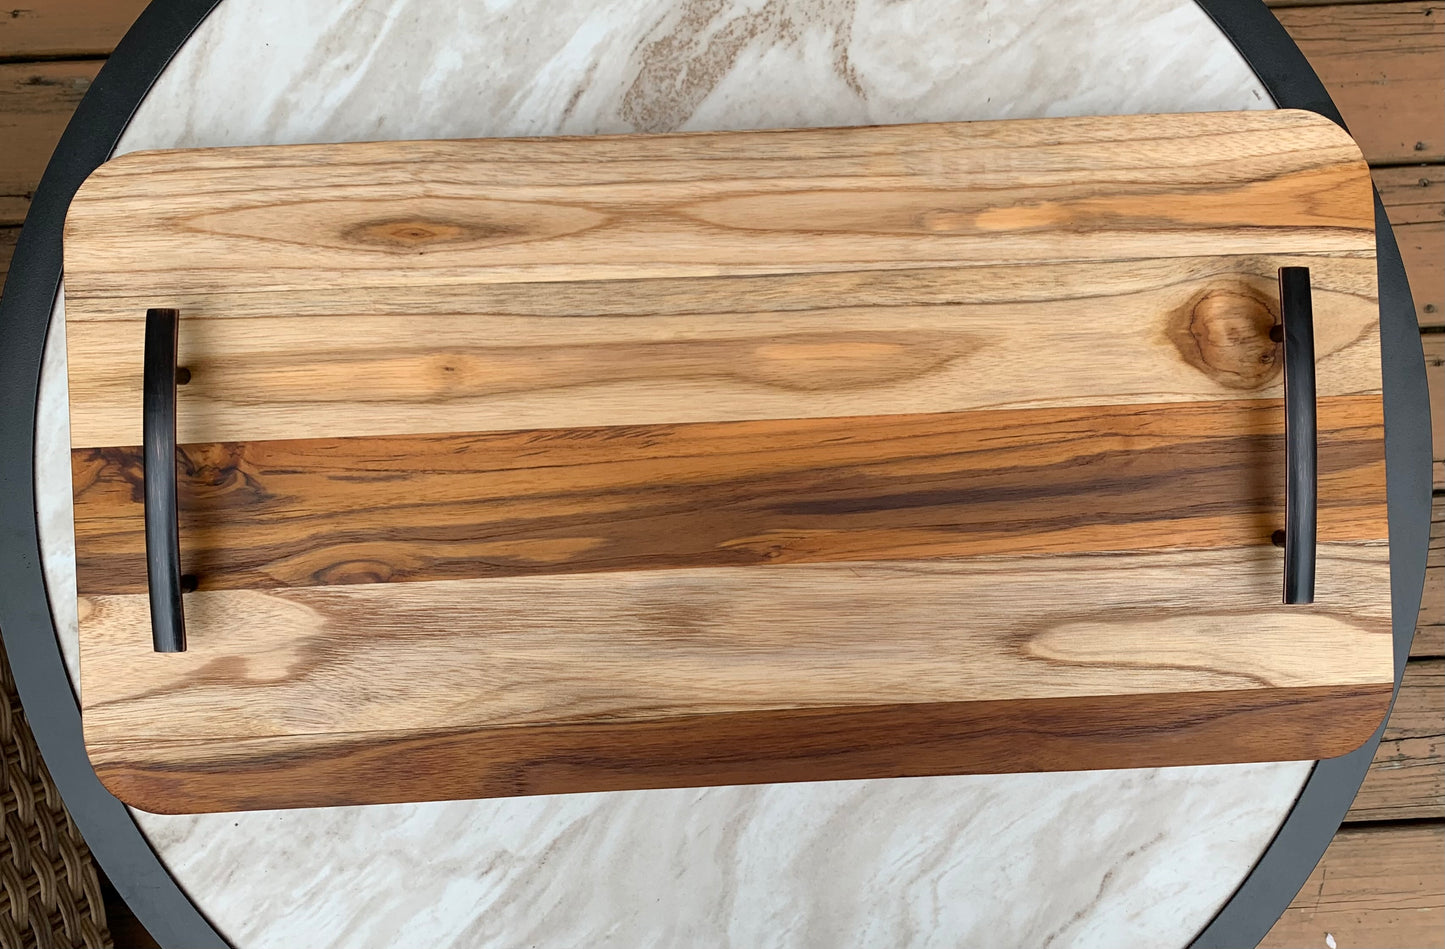 Teak wood charcuterie board, cutting board, cheese board, serving tray with handles